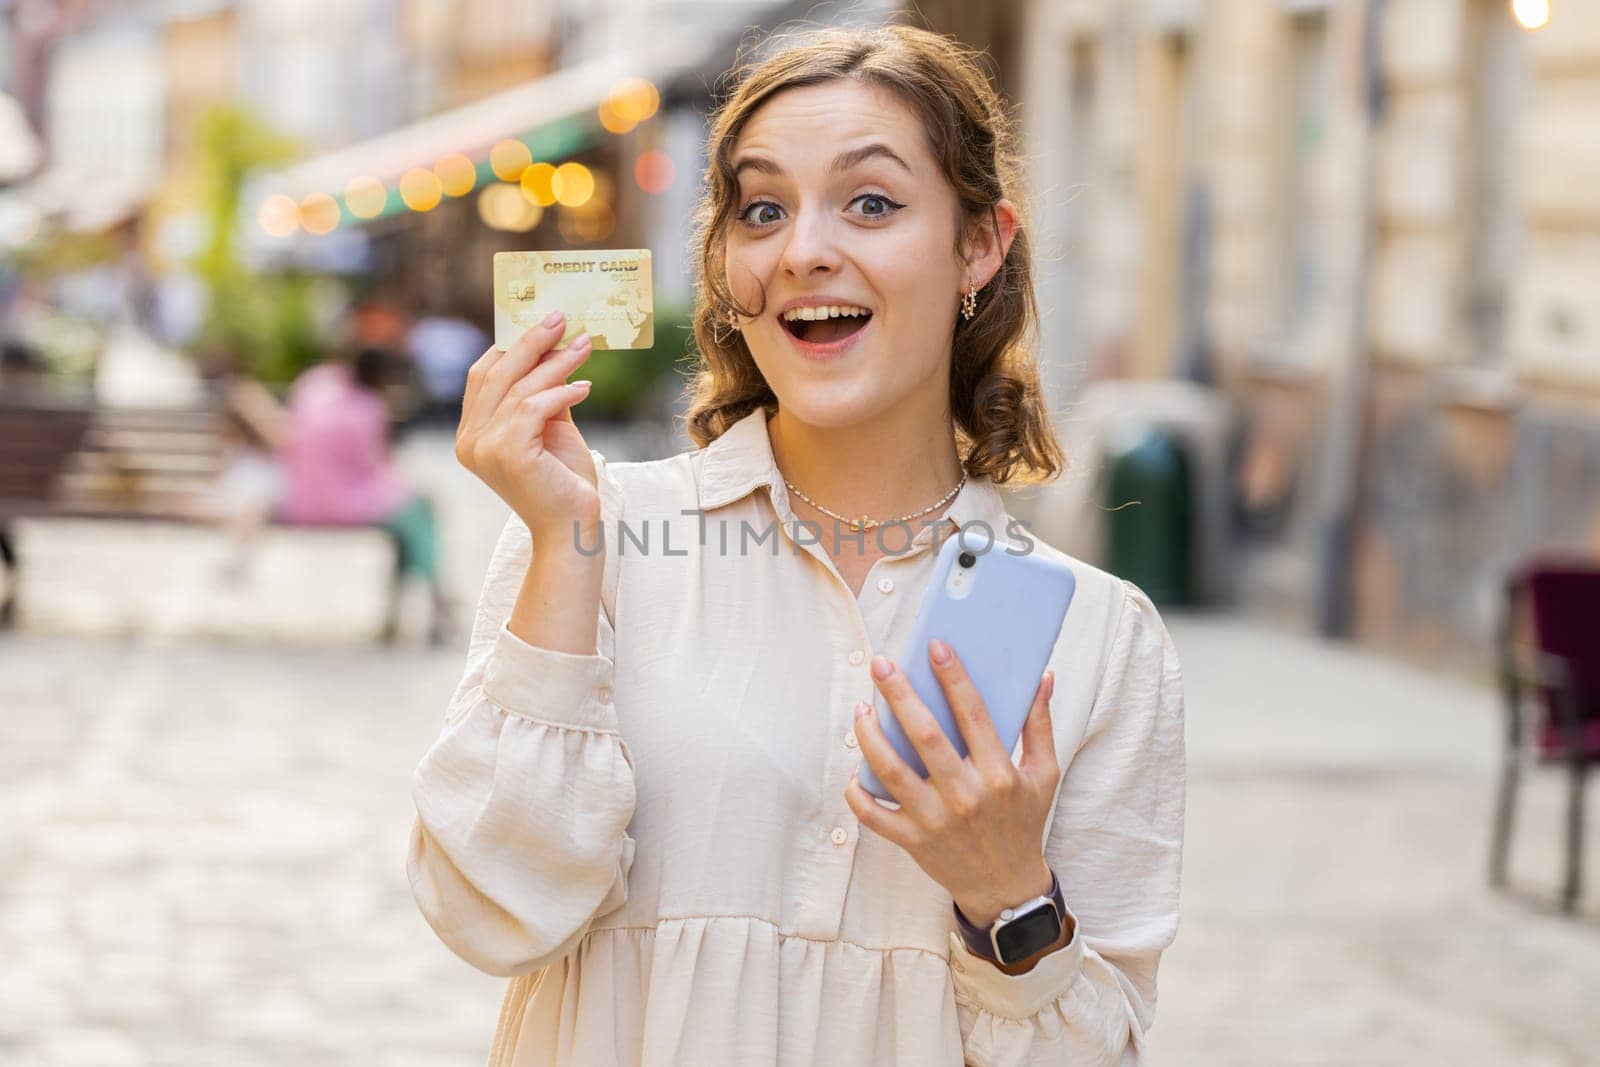 Young woman using credit bank card smartphone while transferring money, purchases online shopping, order food delivery, booking hotel room. Lovely girl walking in urban city sunny street outdoors